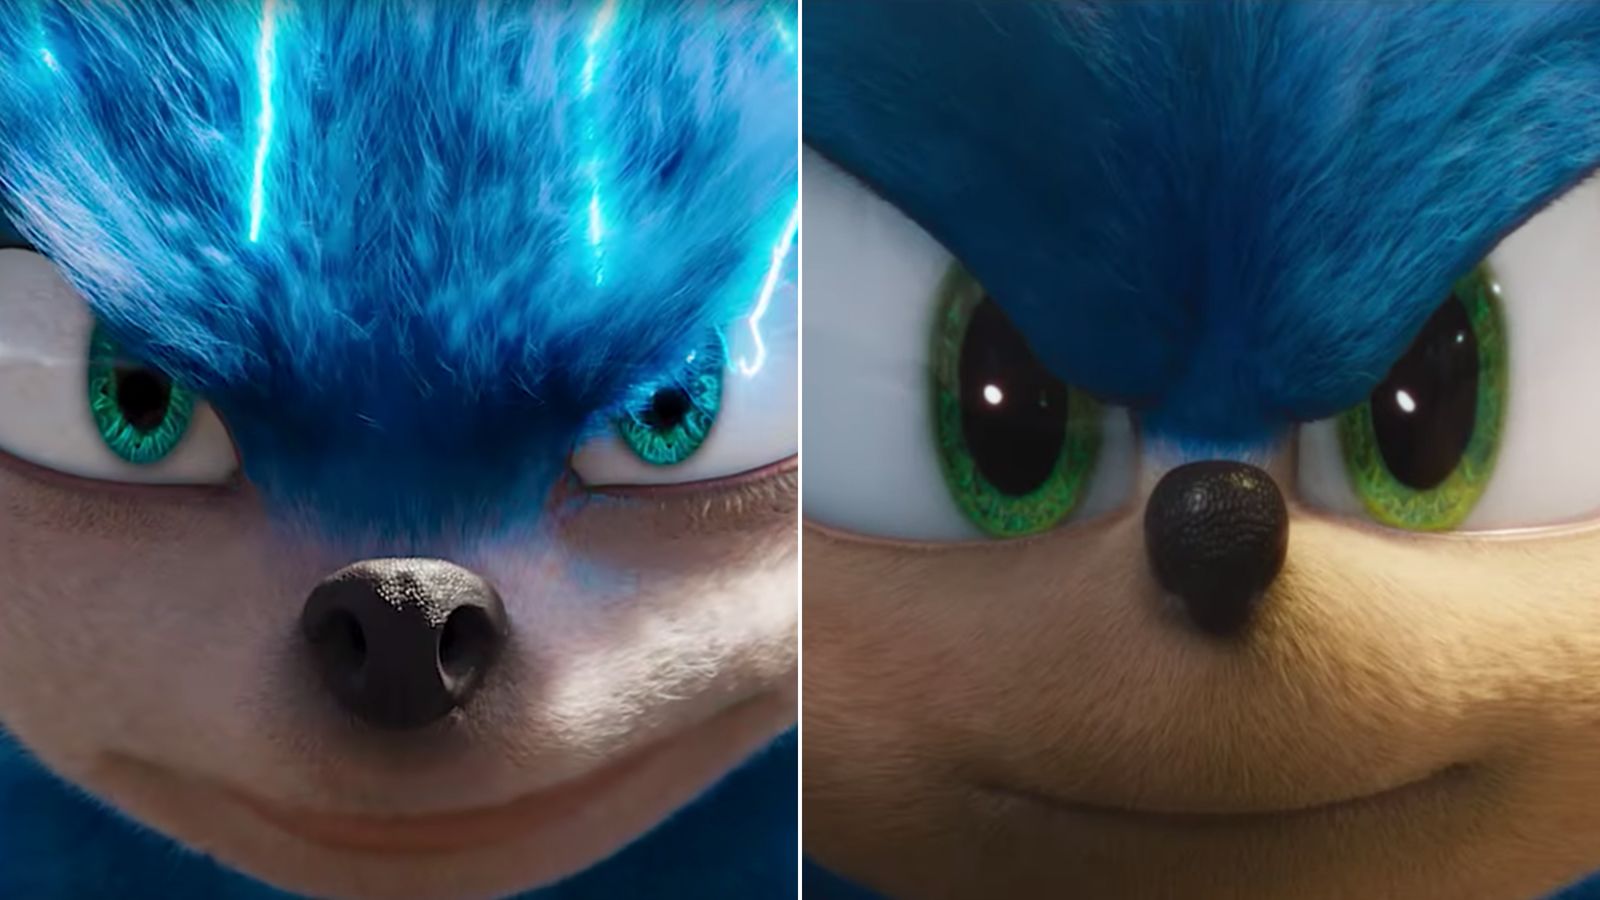 Sonic the Hedgehog' movie redesign: How backlash made Sonic stronger